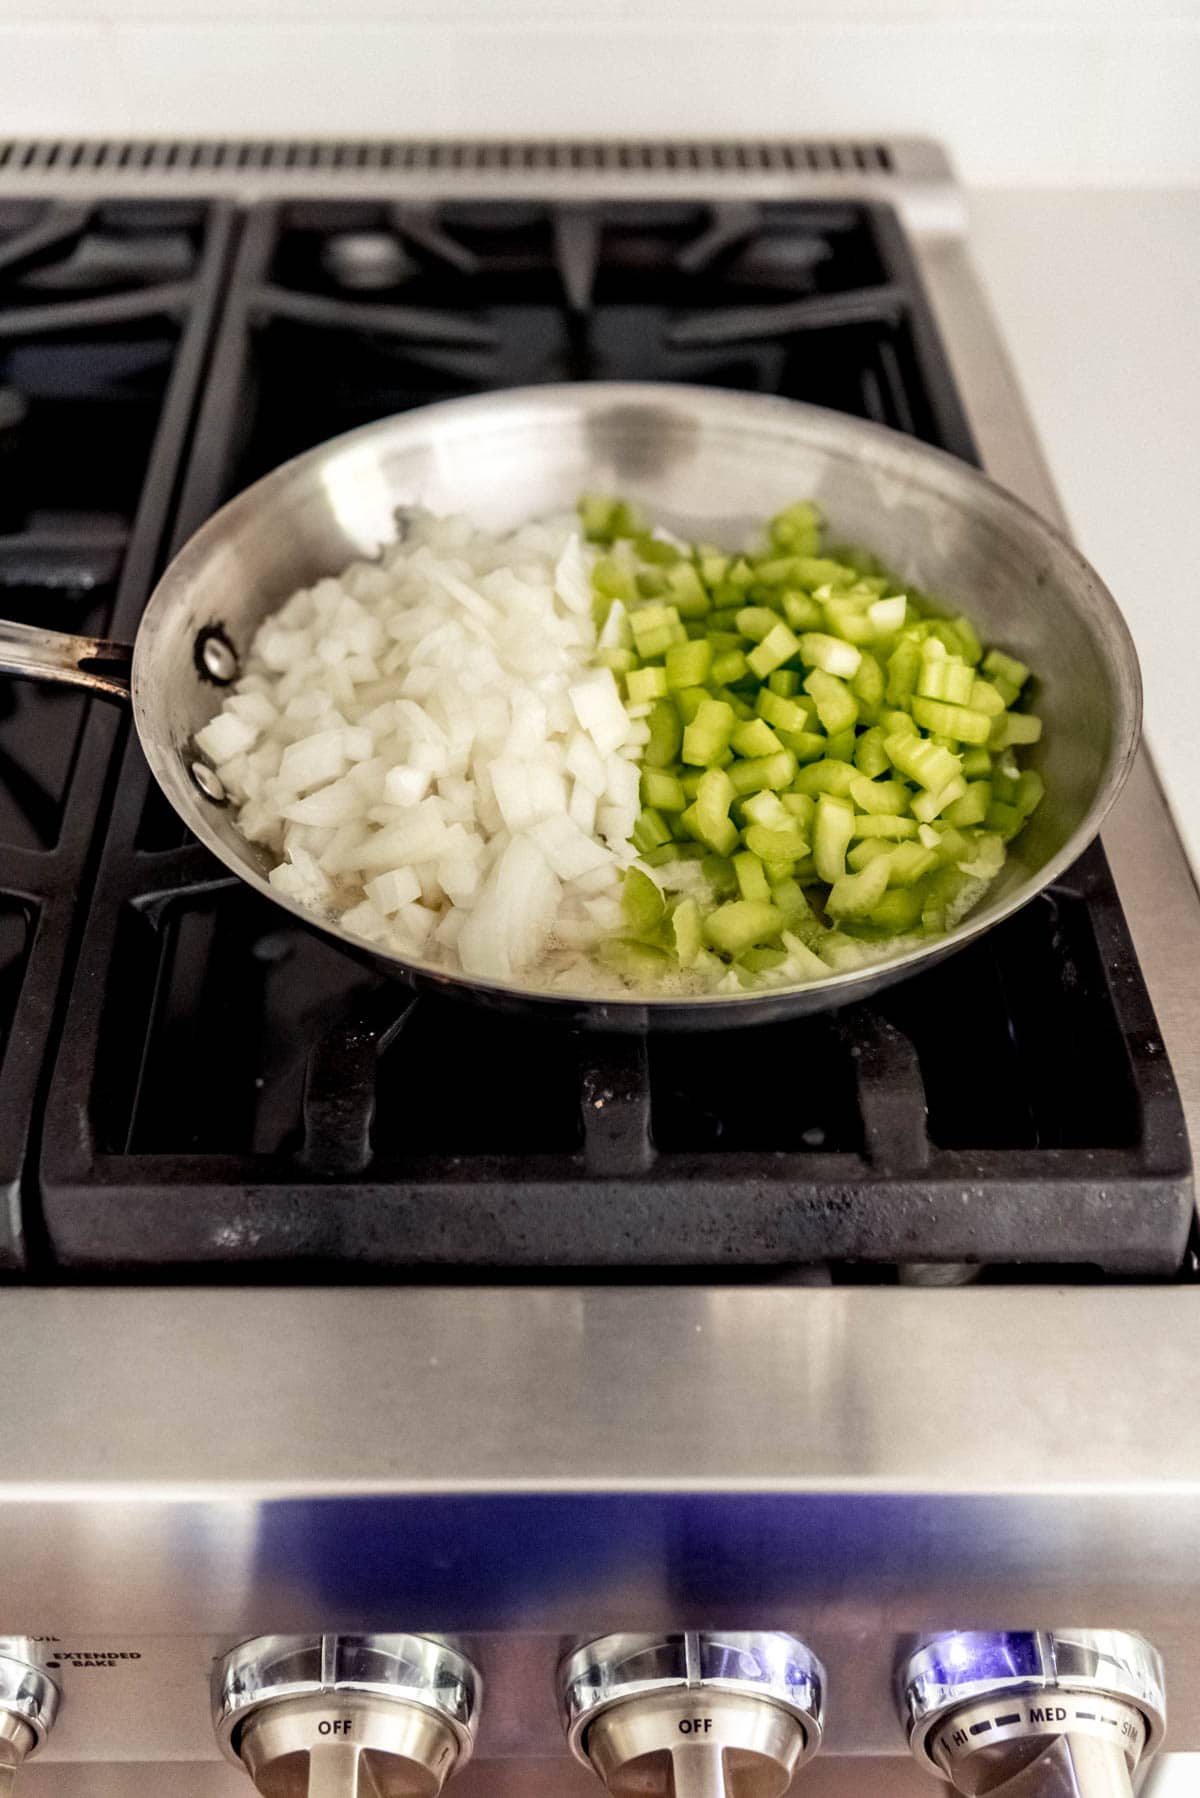 Chopped celery and onions in a pan on a stove.